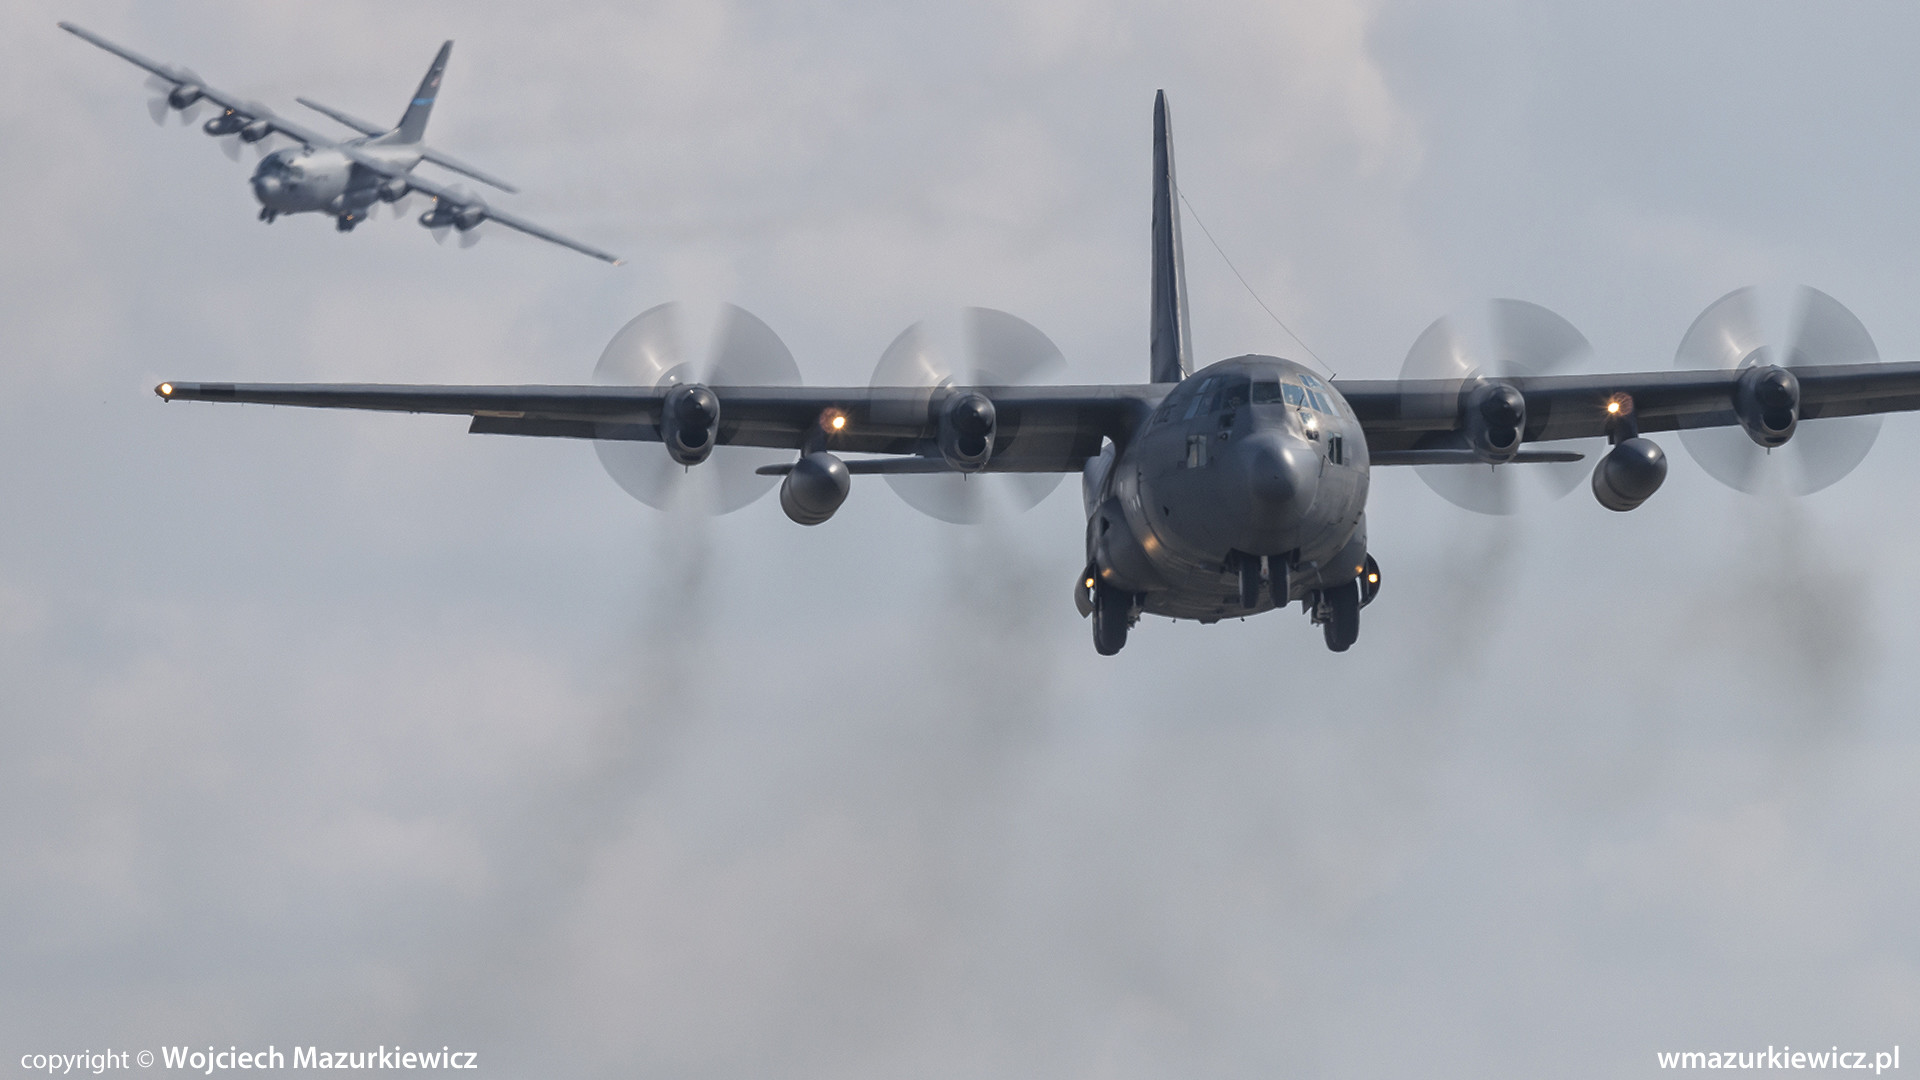 1920x1080 U.S. and Polish Hercules trained to perform cargo drops while evading  MiG-29 interception during exercise in Poland